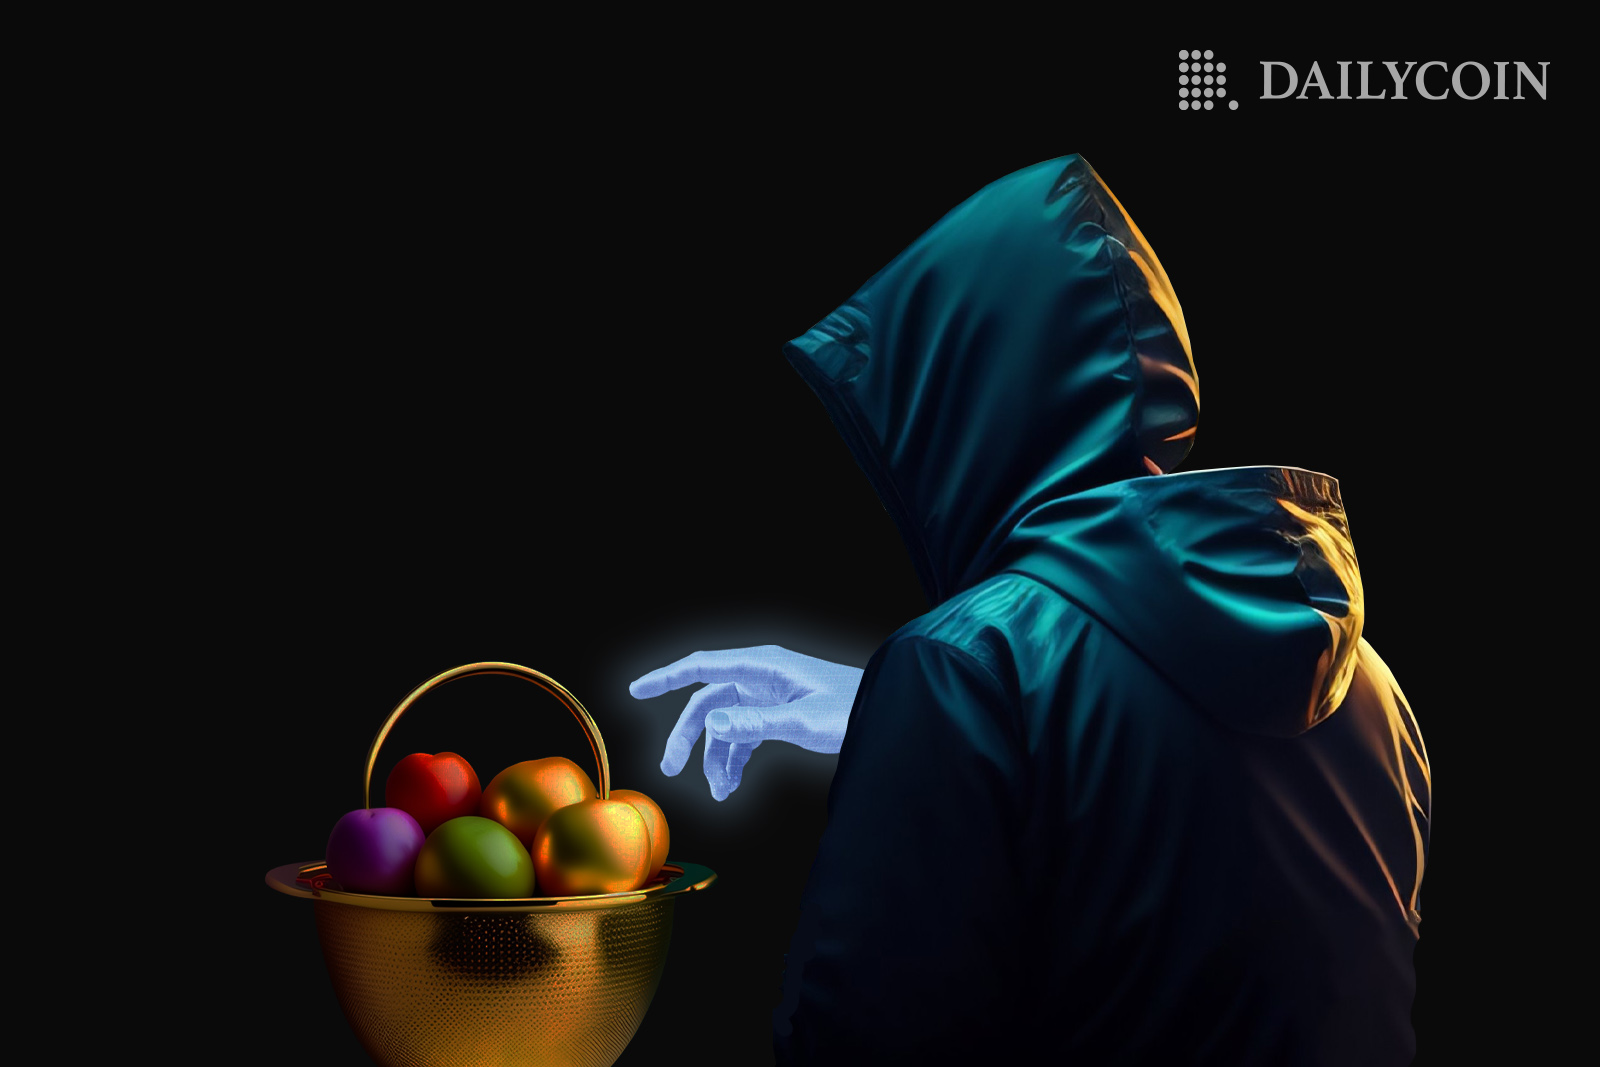 A man in hood is trying to get hold of some colourful fruits